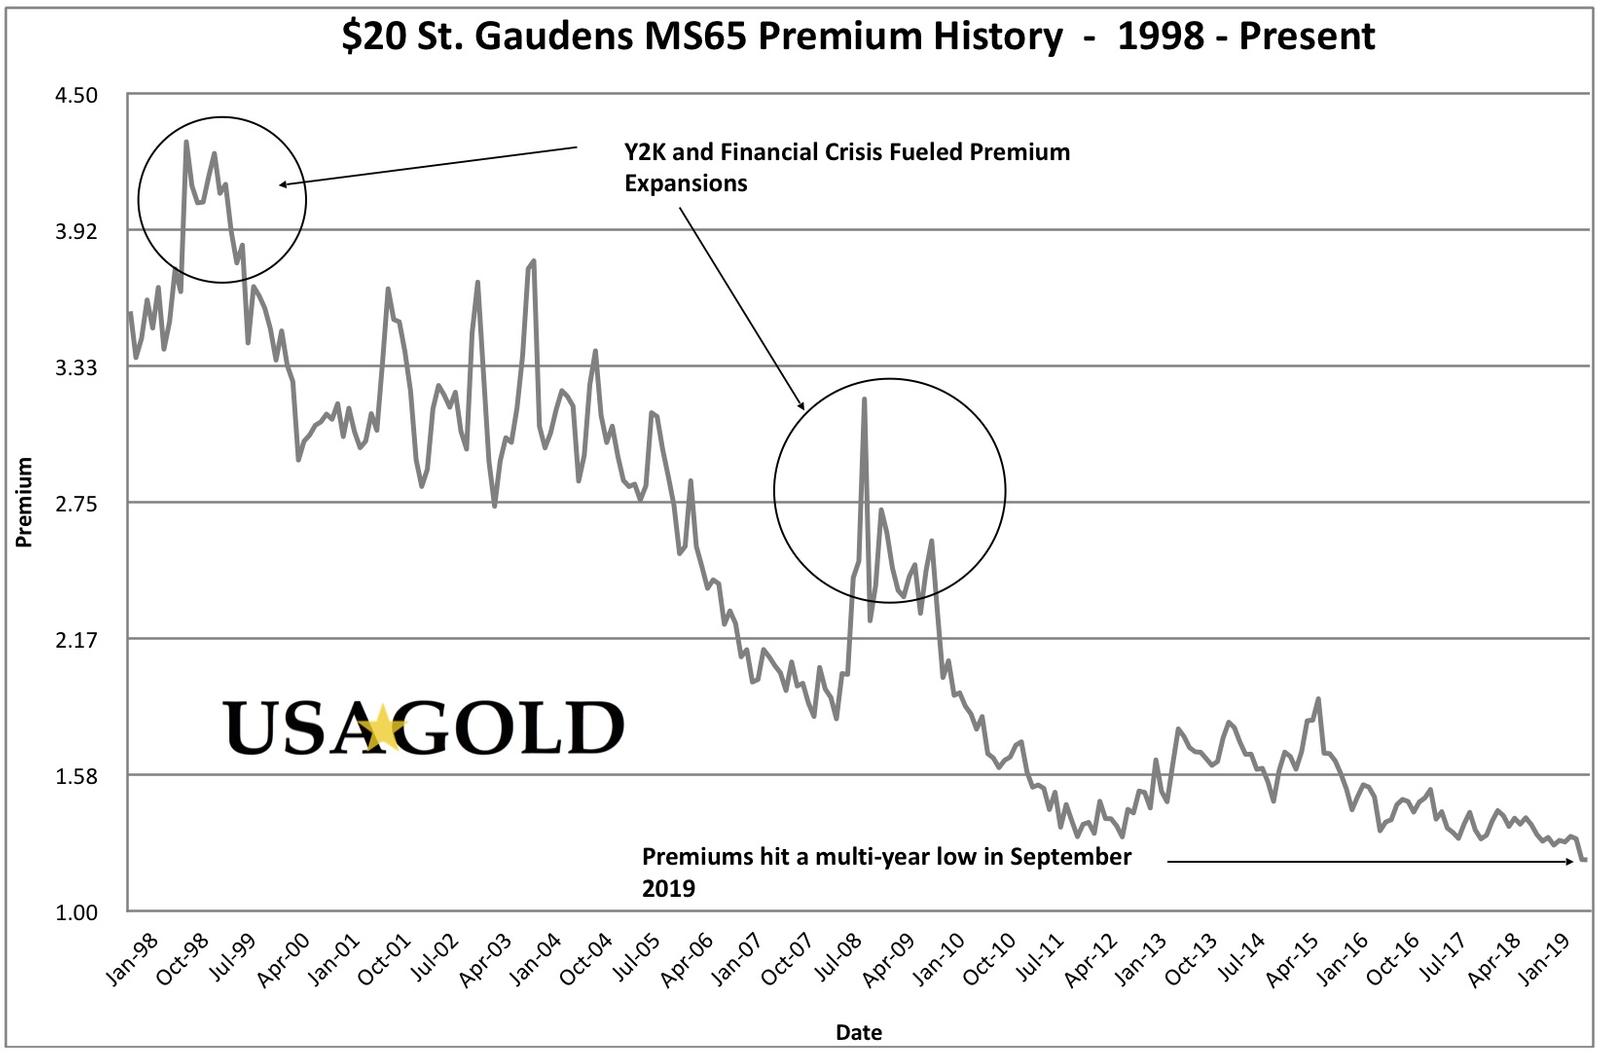 Line chart sowing premium history of $20 St Gaudens MS 65